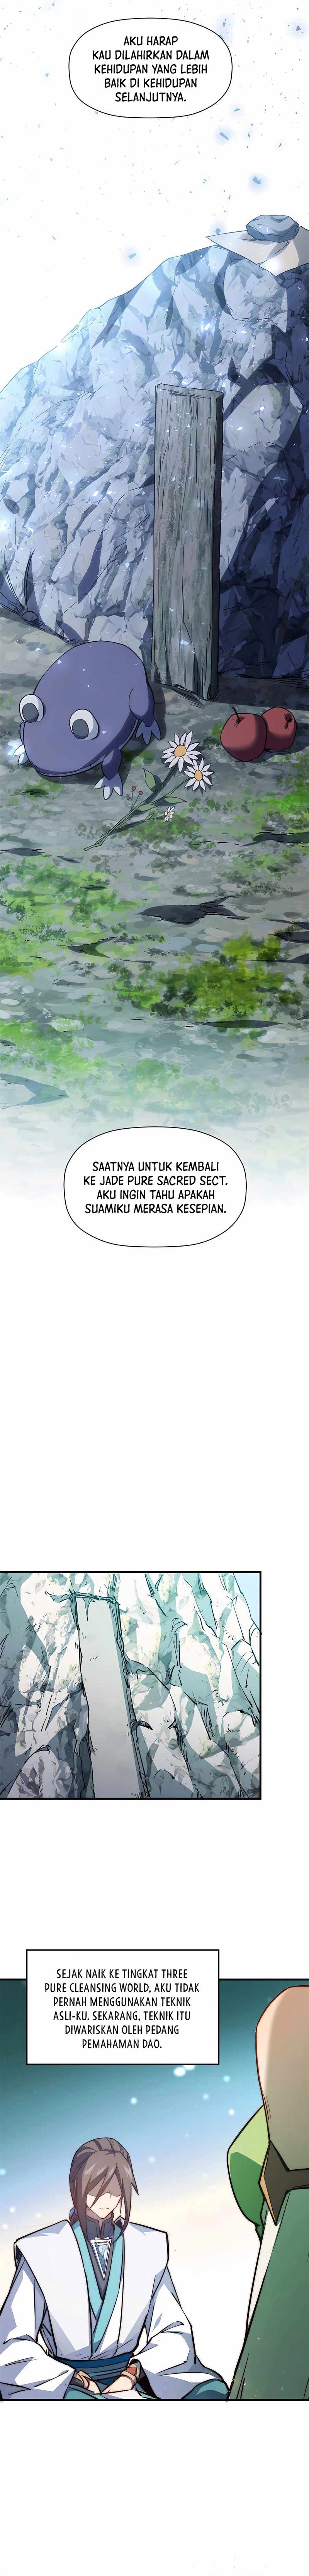 Dilarang COPAS - situs resmi www.mangacanblog.com - Komik top tier providence secretly cultivate for a thousand years 129 - chapter 129 130 Indonesia top tier providence secretly cultivate for a thousand years 129 - chapter 129 Terbaru 8|Baca Manga Komik Indonesia|Mangacan